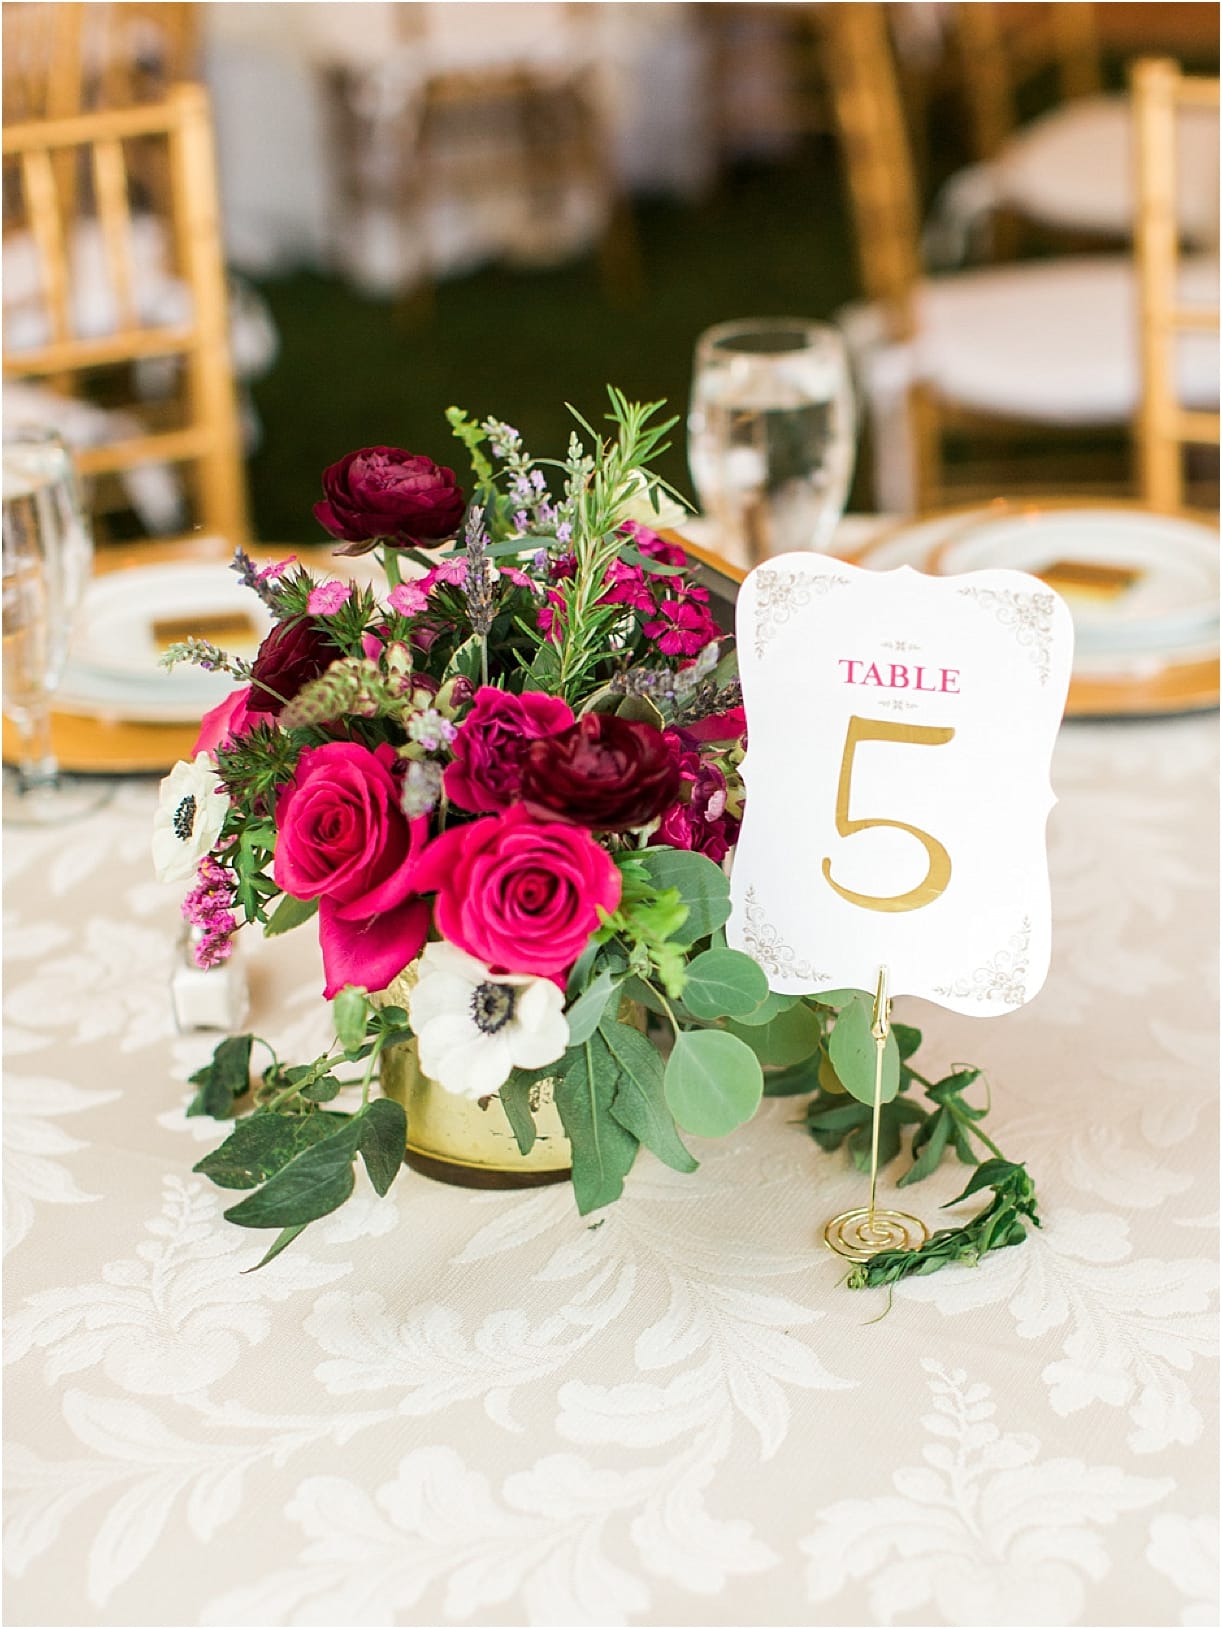 Historic Virginia Plantation Wedding as seen on Hill City Bride Blog by Rebekah Emily Photography - table number, flowers, centerpiece